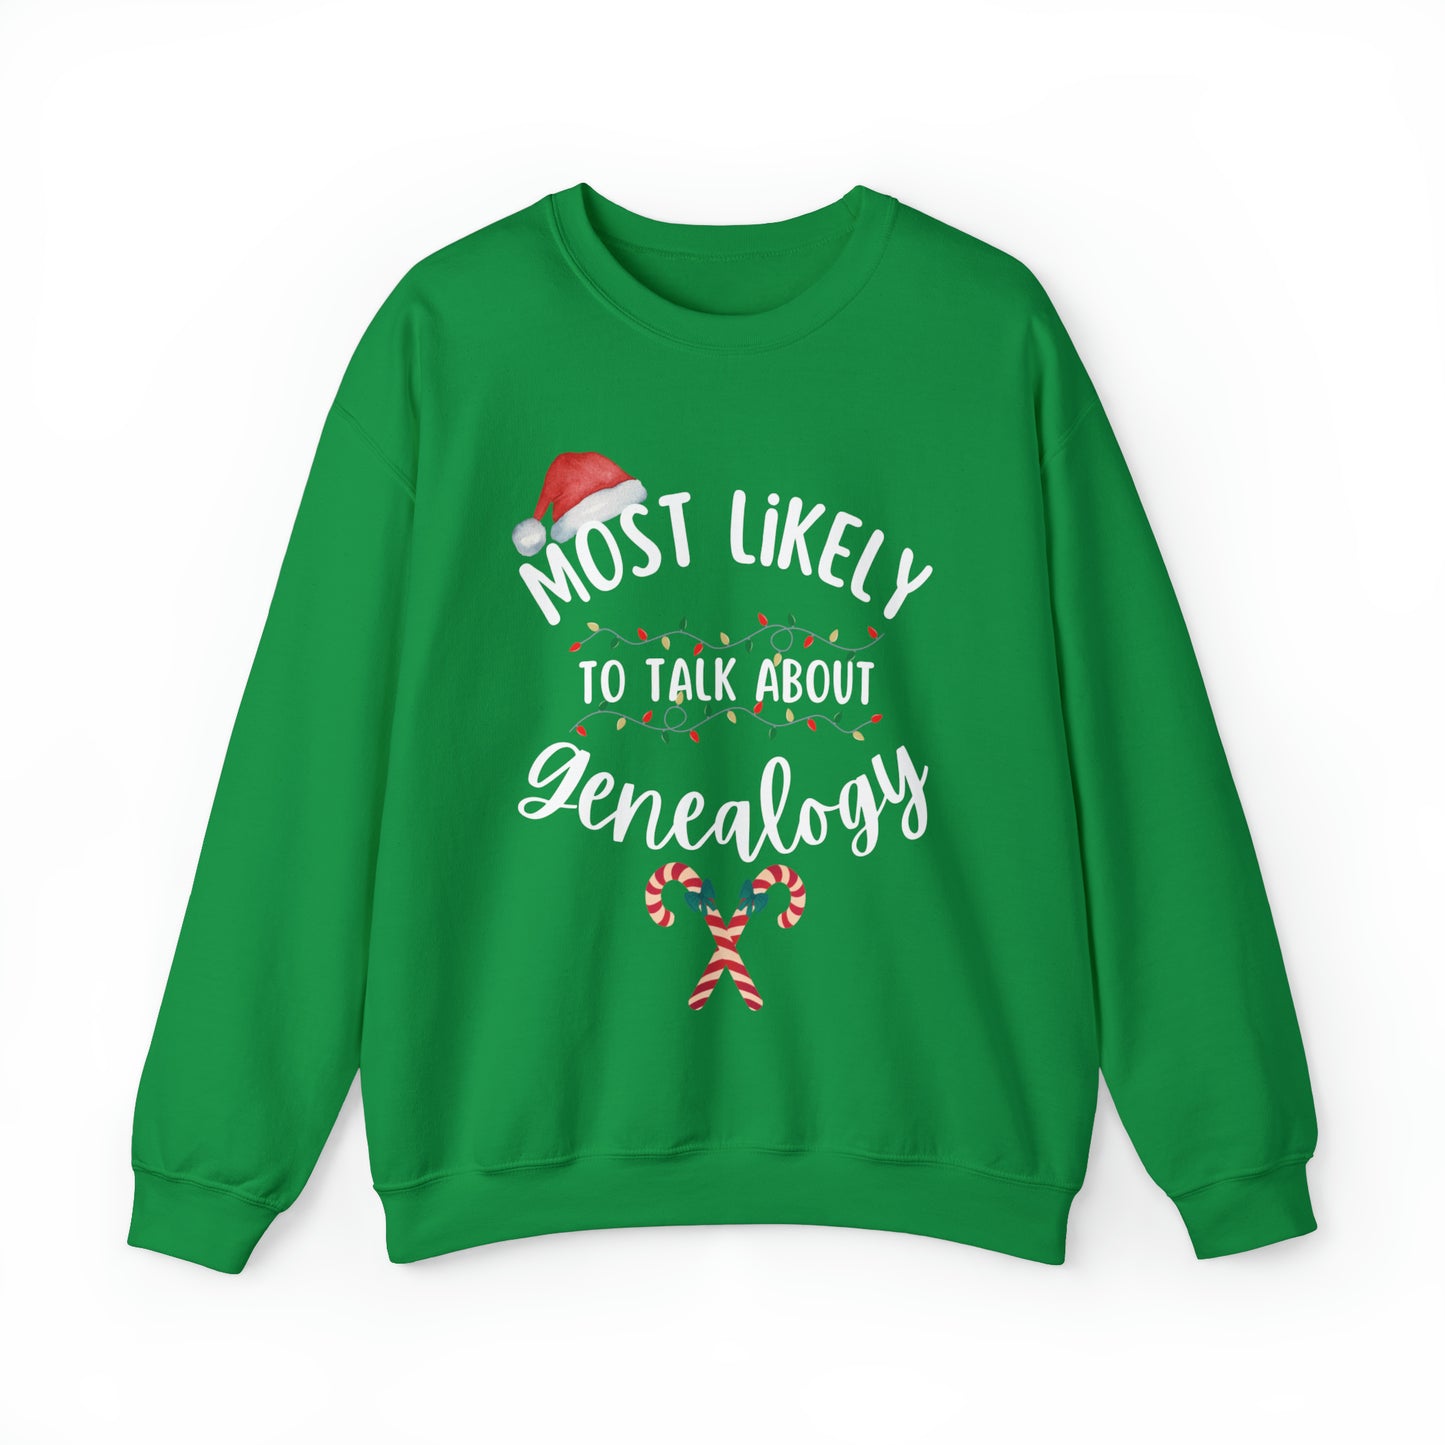 Most Likely to Talk About Genealogy Crewneck Sweatshirt